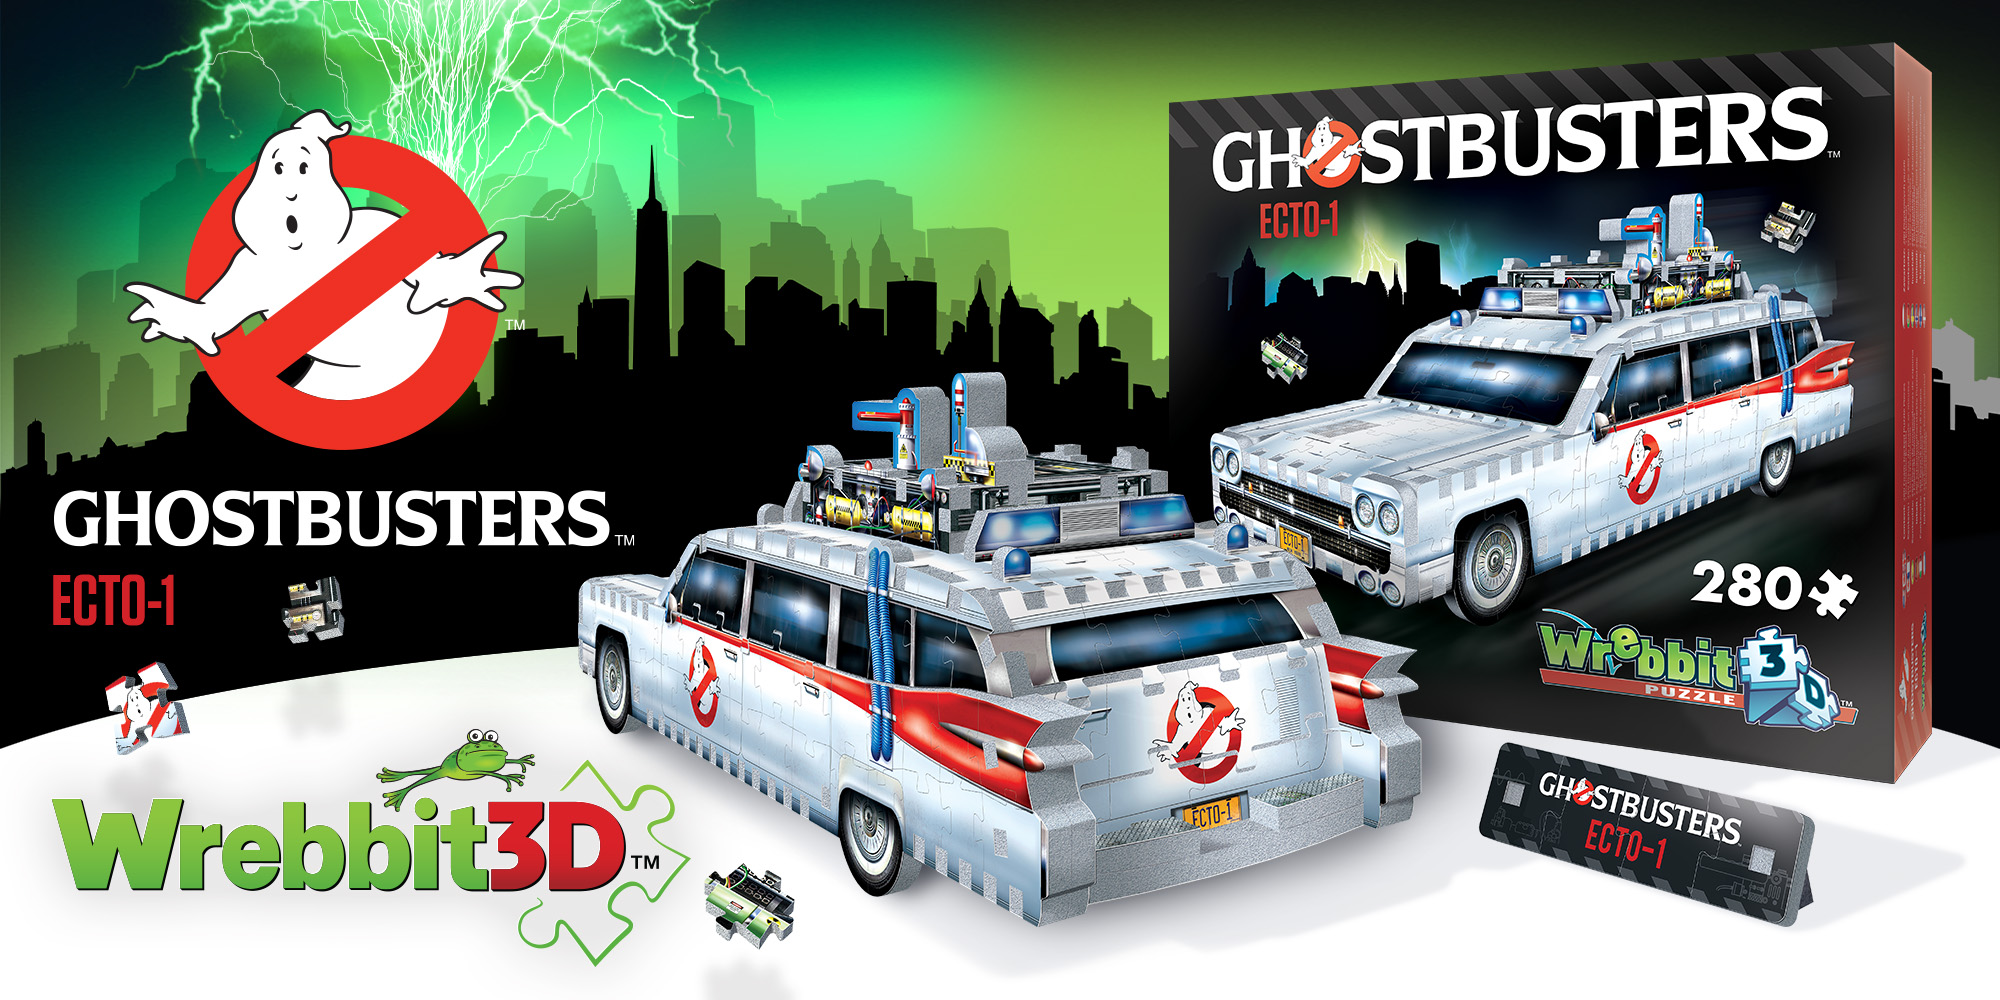 Ghostbusters-main